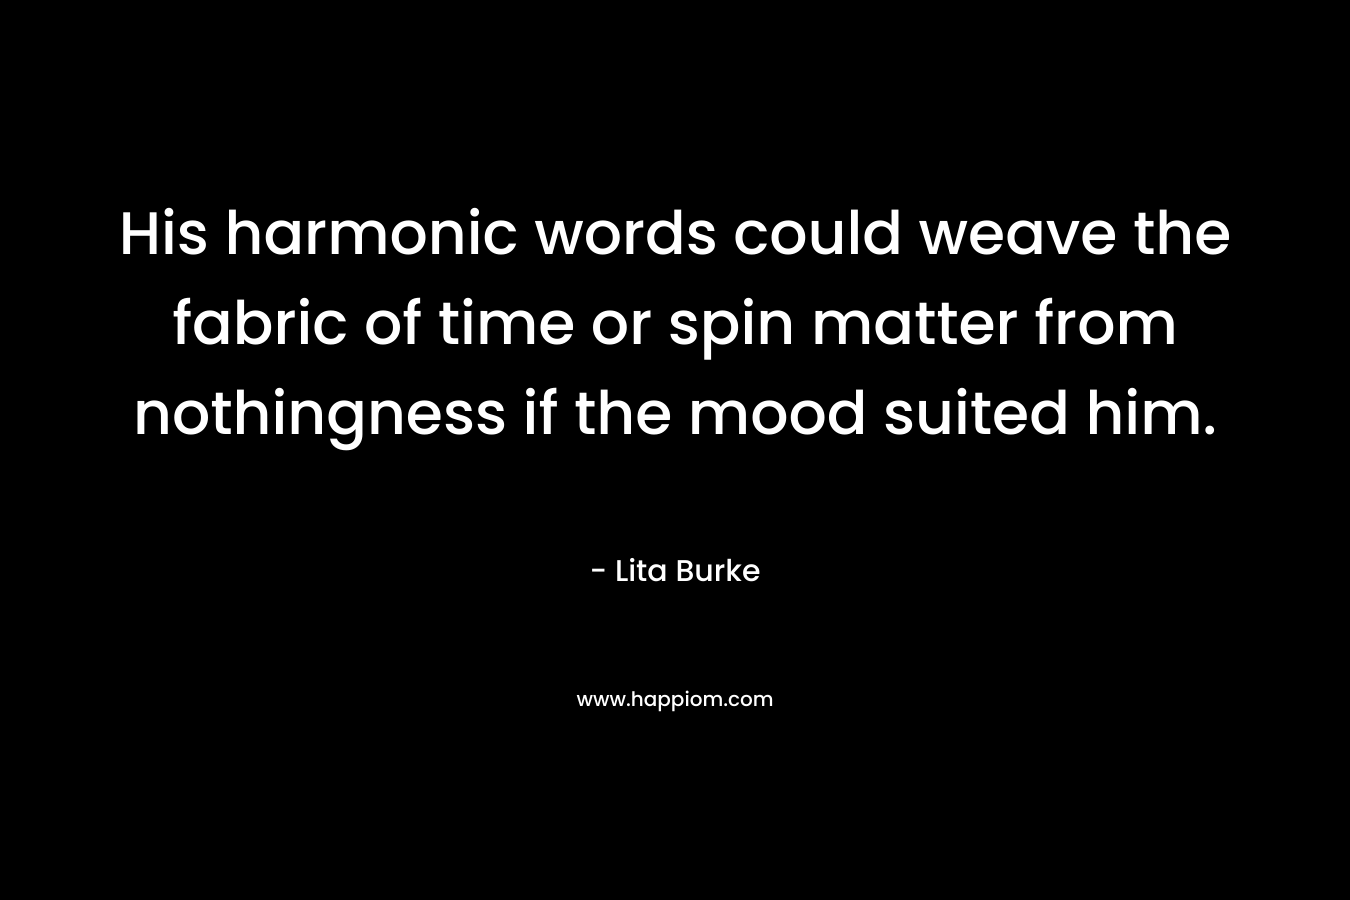 His harmonic words could weave the fabric of time or spin matter from nothingness if the mood suited him. – Lita Burke